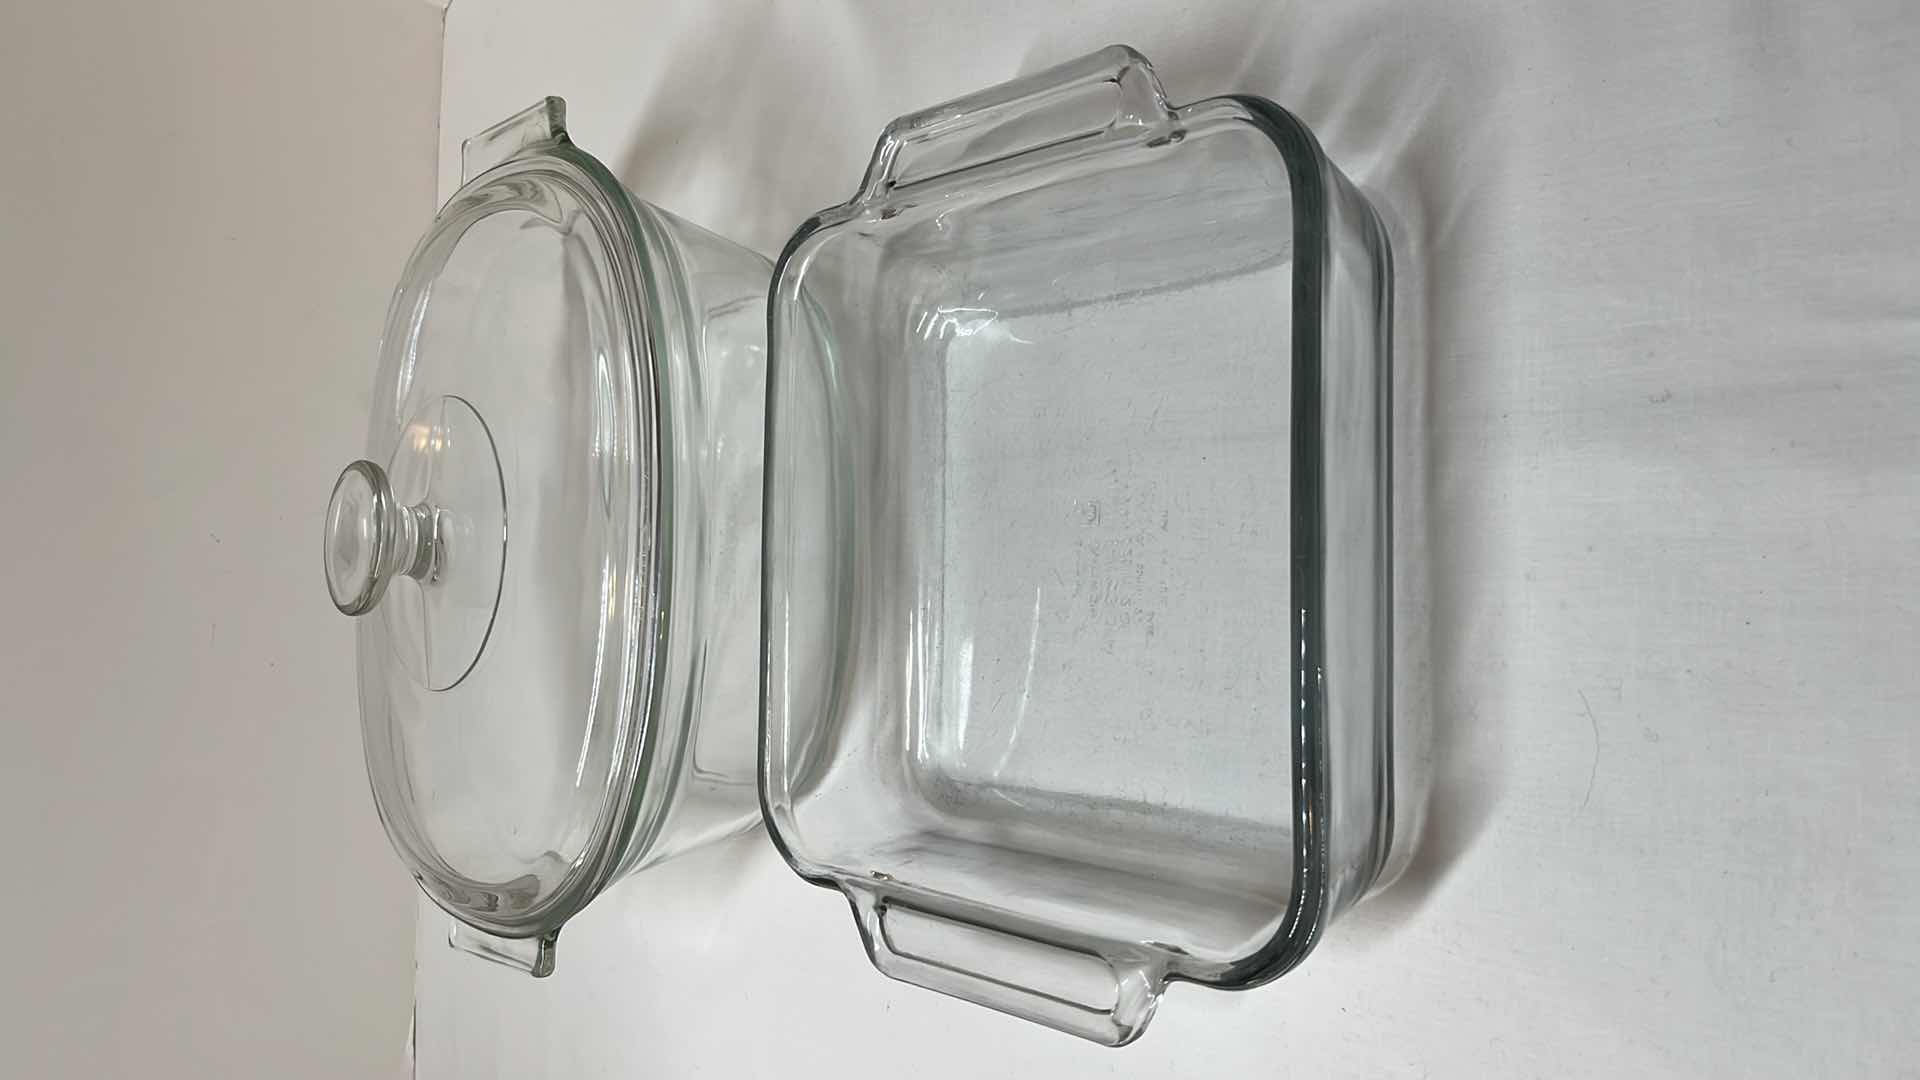 Photo 1 of VINTAGE PYREX GLASS CLEAR CORNING WARE/OVAL ROASTER W LID & ANCHOR OVENWARE GLASS 2 QT SQUARE BAKING DISH